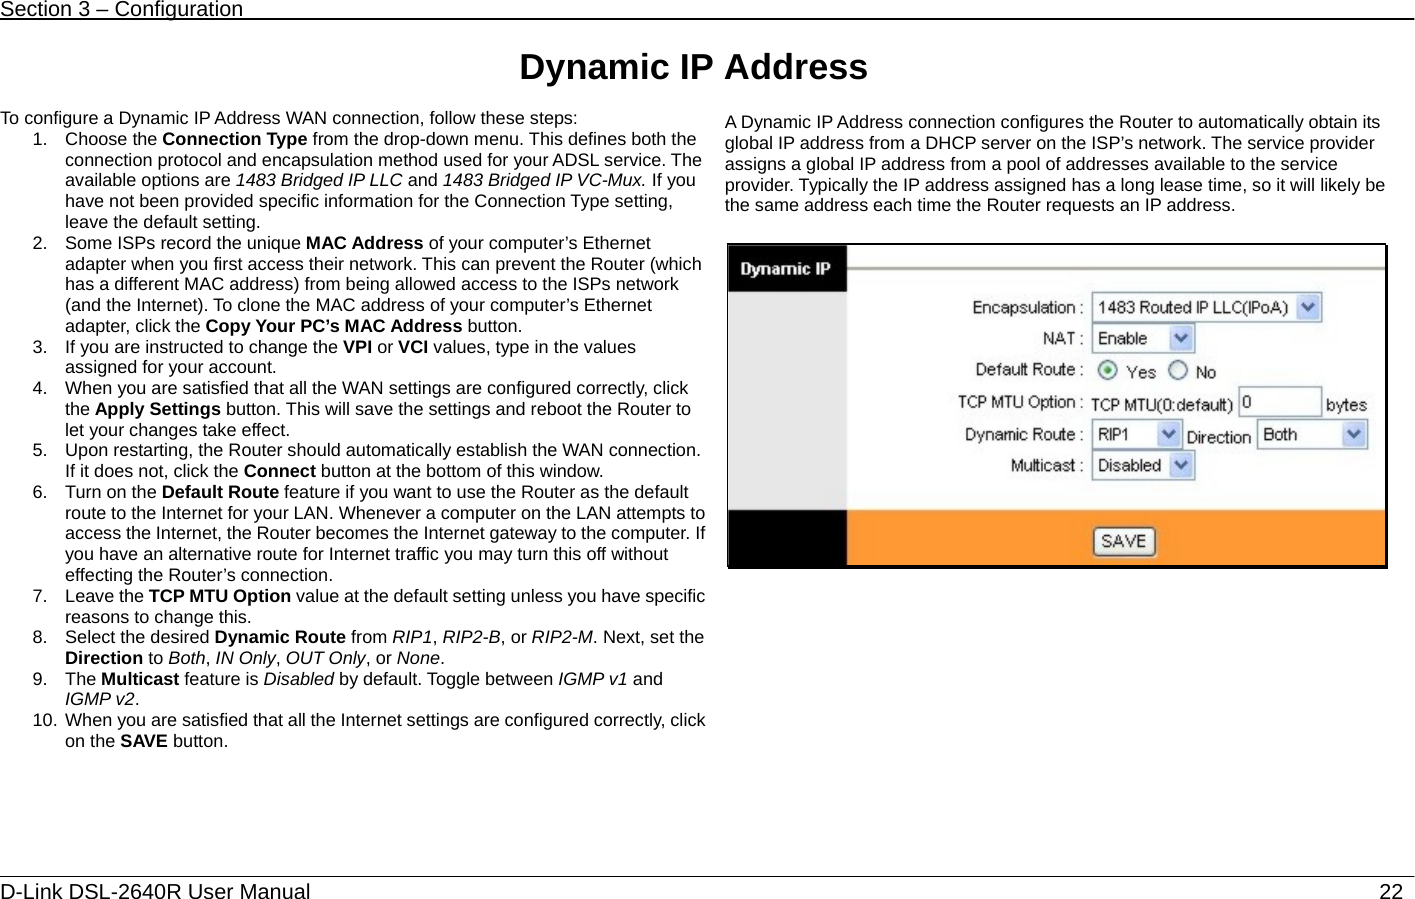 Section 3 – Configuration   D-Link DSL-2640R User Manual                           22Dynamic IP Address  To configure a Dynamic IP Address WAN connection, follow these steps: 1. Choose the Connection Type from the drop-down menu. This defines both the connection protocol and encapsulation method used for your ADSL service. The available options are 1483 Bridged IP LLC and 1483 Bridged IP VC-Mux. If you have not been provided specific information for the Connection Type setting, leave the default setting. 2.  Some ISPs record the unique MAC Address of your computer’s Ethernet adapter when you first access their network. This can prevent the Router (which has a different MAC address) from being allowed access to the ISPs network (and the Internet). To clone the MAC address of your computer’s Ethernet adapter, click the Copy Your PC’s MAC Address button. 3.  If you are instructed to change the VPI or VCI values, type in the values assigned for your account. 4.  When you are satisfied that all the WAN settings are configured correctly, click the Apply Settings button. This will save the settings and reboot the Router to let your changes take effect.   5.  Upon restarting, the Router should automatically establish the WAN connection. If it does not, click the Connect button at the bottom of this window. 6.  Turn on the Default Route feature if you want to use the Router as the default route to the Internet for your LAN. Whenever a computer on the LAN attempts to access the Internet, the Router becomes the Internet gateway to the computer. If you have an alternative route for Internet traffic you may turn this off without effecting the Router’s connection.   7. Leave the TCP MTU Option value at the default setting unless you have specific reasons to change this. 8.  Select the desired Dynamic Route from RIP1, RIP2-B, or RIP2-M. Next, set the Direction to Both, IN Only, OUT Only, or None.  9. The Multicast feature is Disabled by default. Toggle between IGMP v1 and IGMP v2.  10. When you are satisfied that all the Internet settings are configured correctly, click on the SAVE button.  A Dynamic IP Address connection configures the Router to automatically obtain its global IP address from a DHCP server on the ISP’s network. The service provider assigns a global IP address from a pool of addresses available to the service provider. Typically the IP address assigned has a long lease time, so it will likely be the same address each time the Router requests an IP address.   